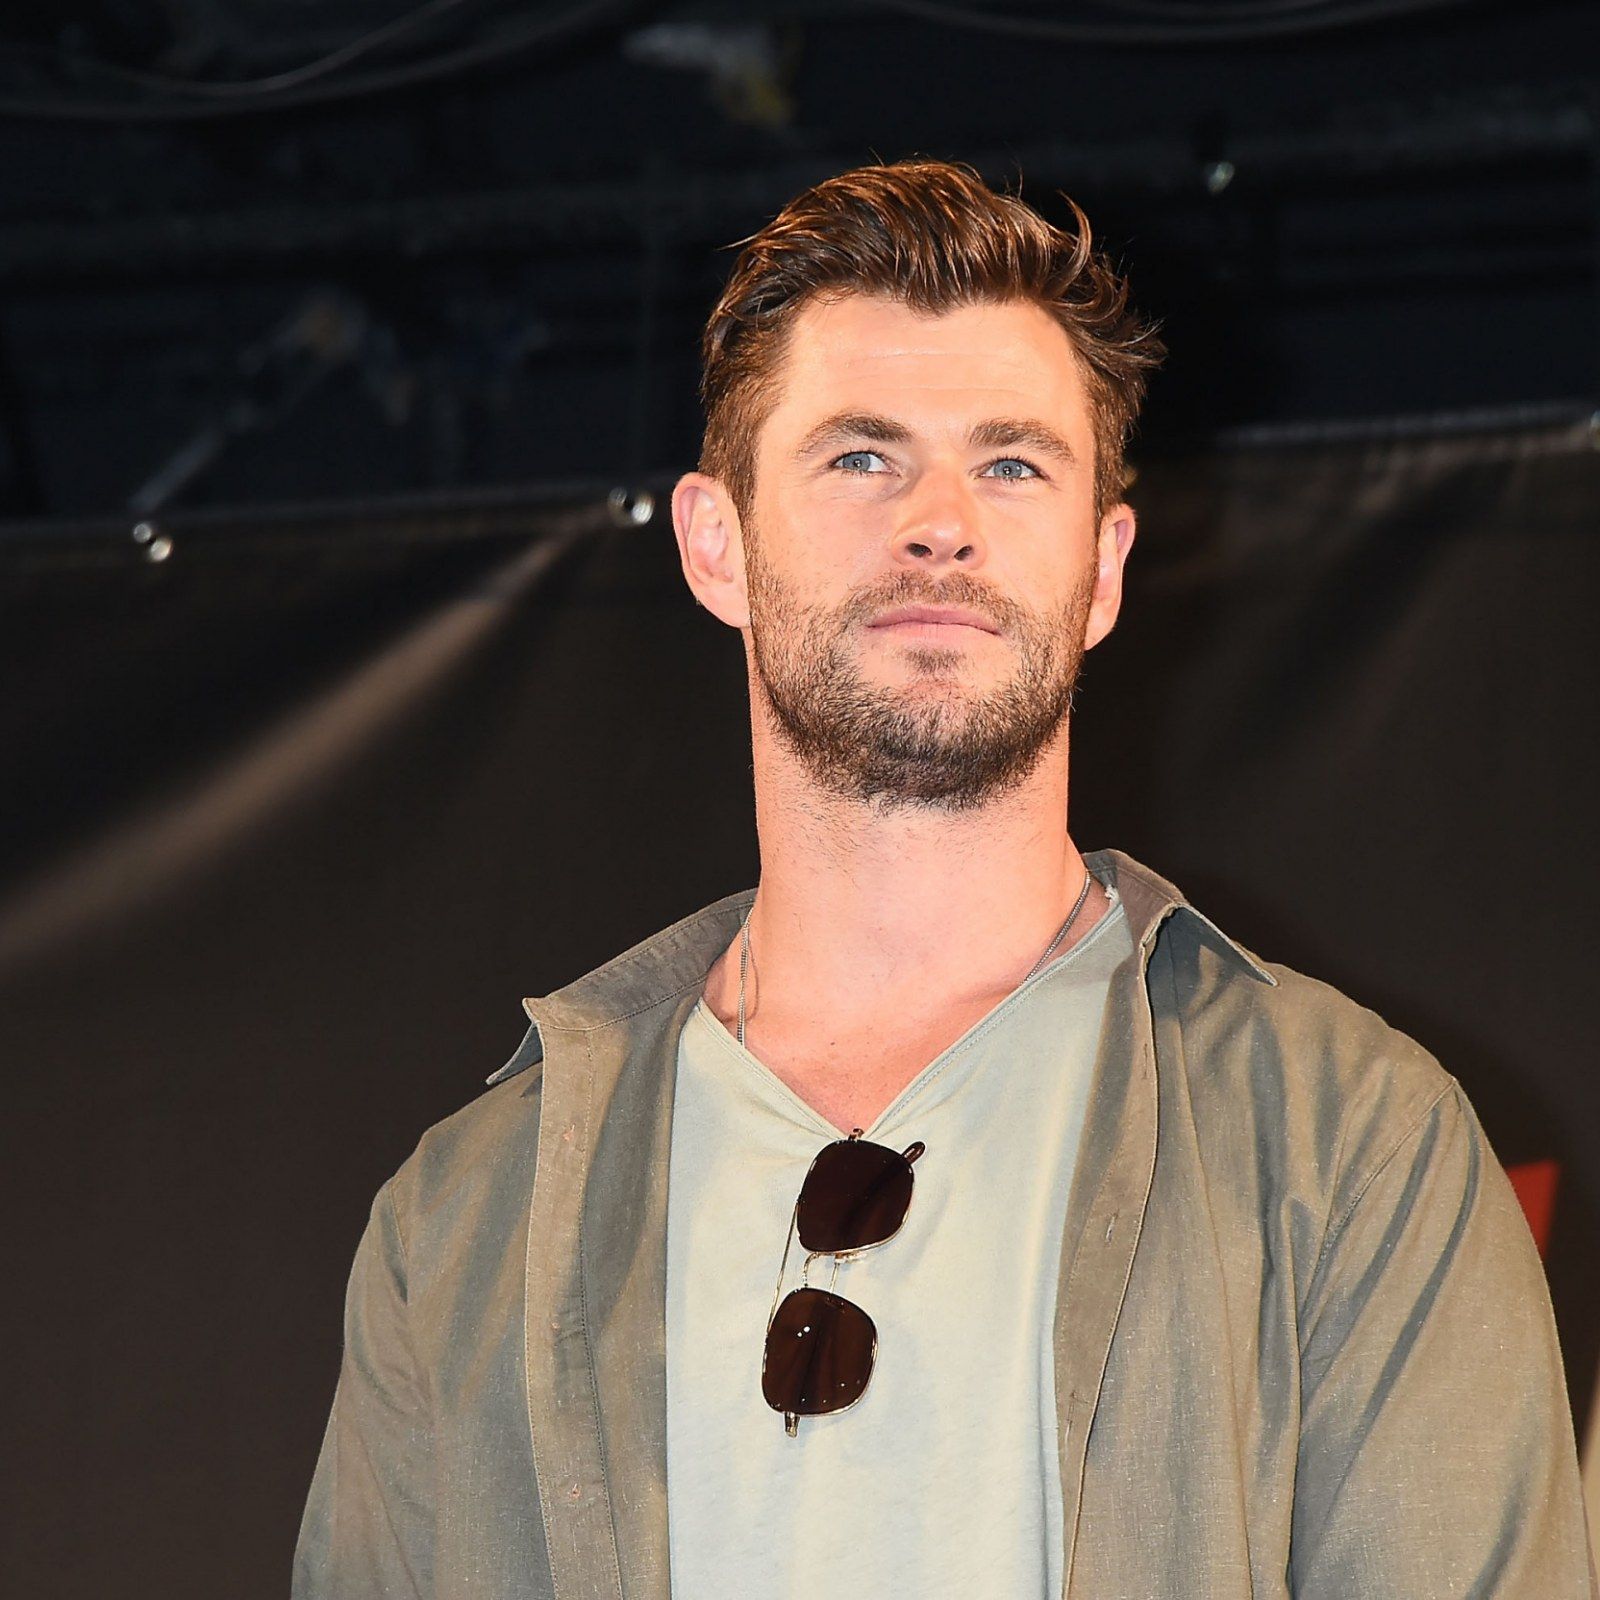 Chris Hemsworth's 'Extraction' Is Coming to Netflix to Entertain The Heck Out of You